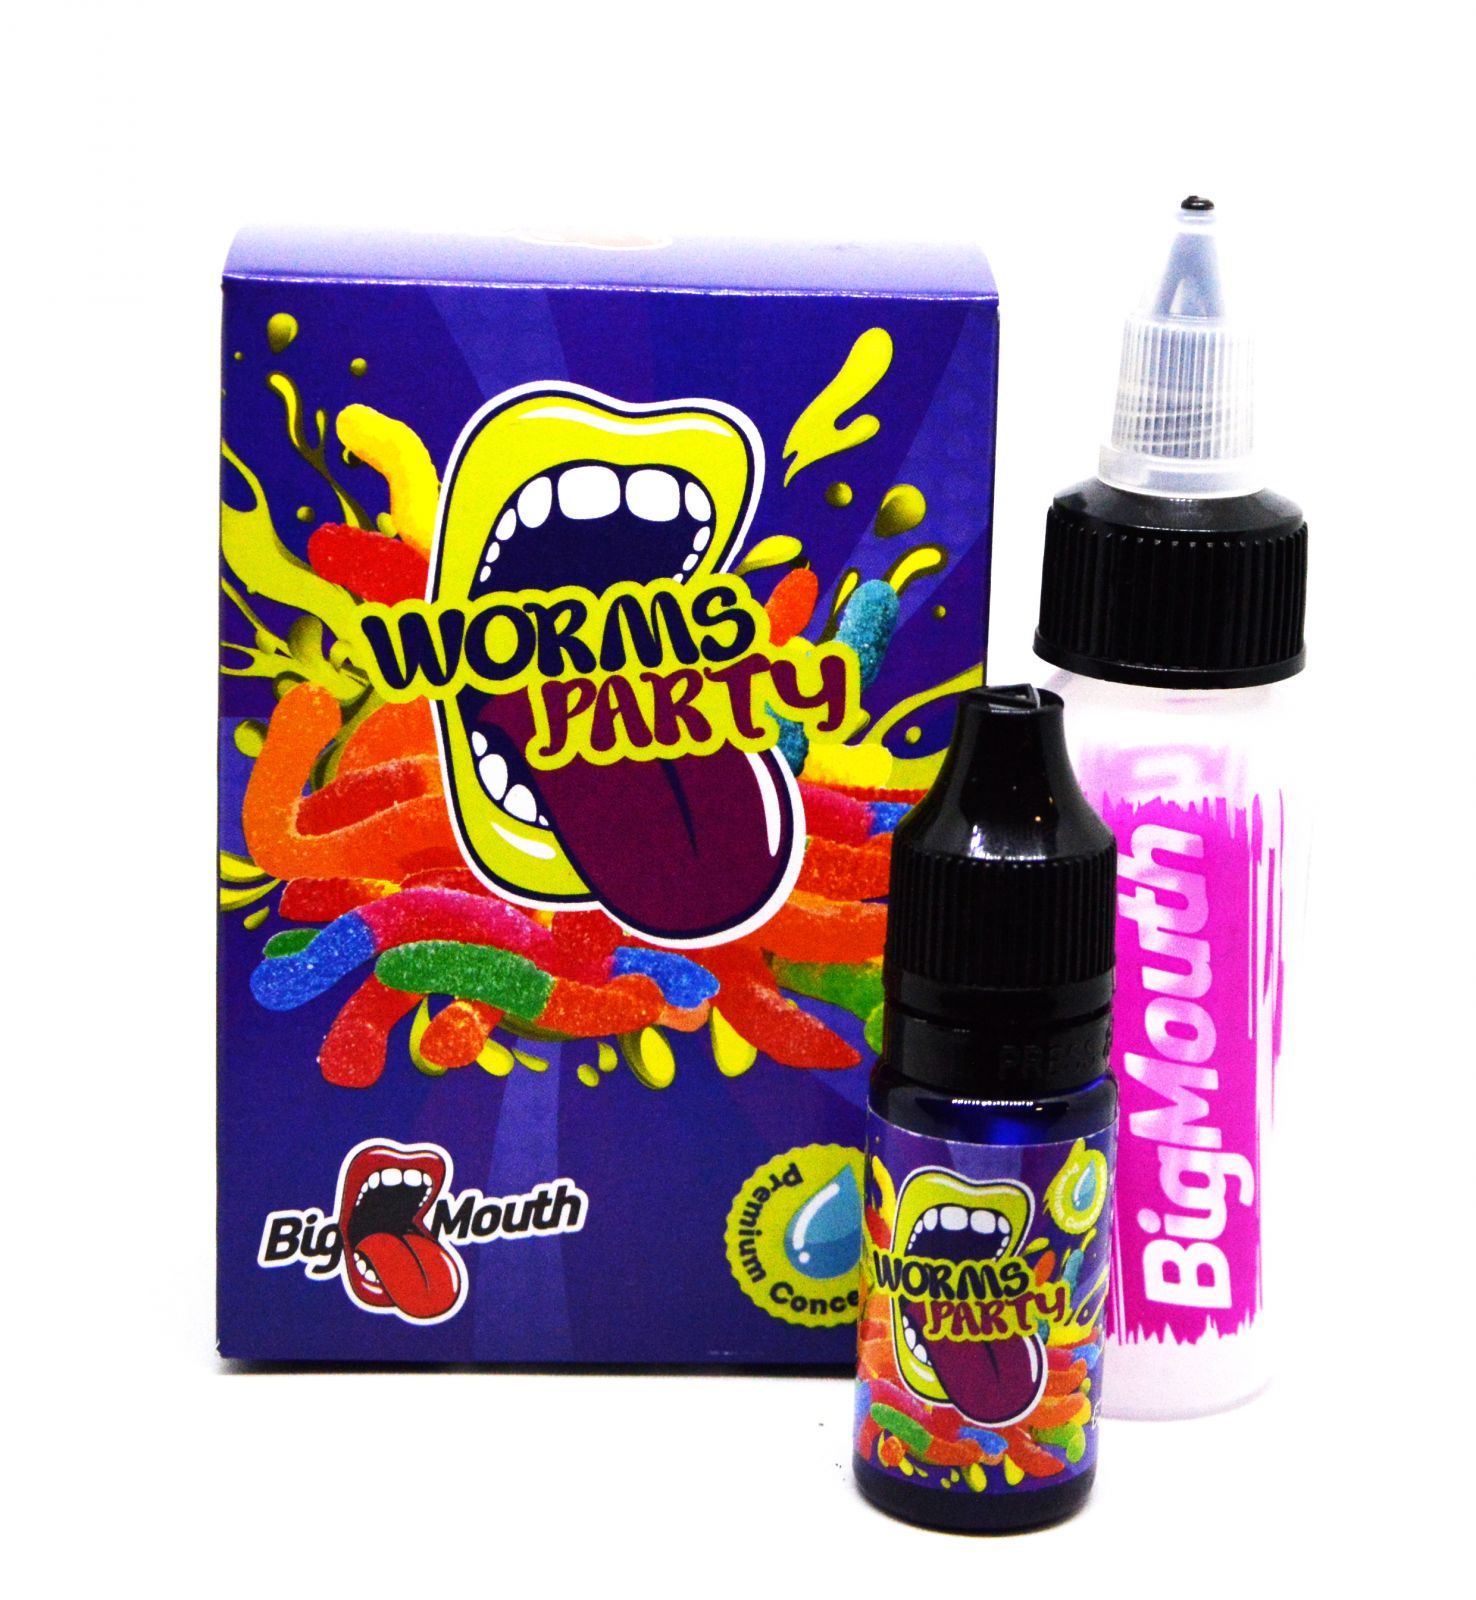 BIG MOUTH AROMA WORMS PARTY 10 ml